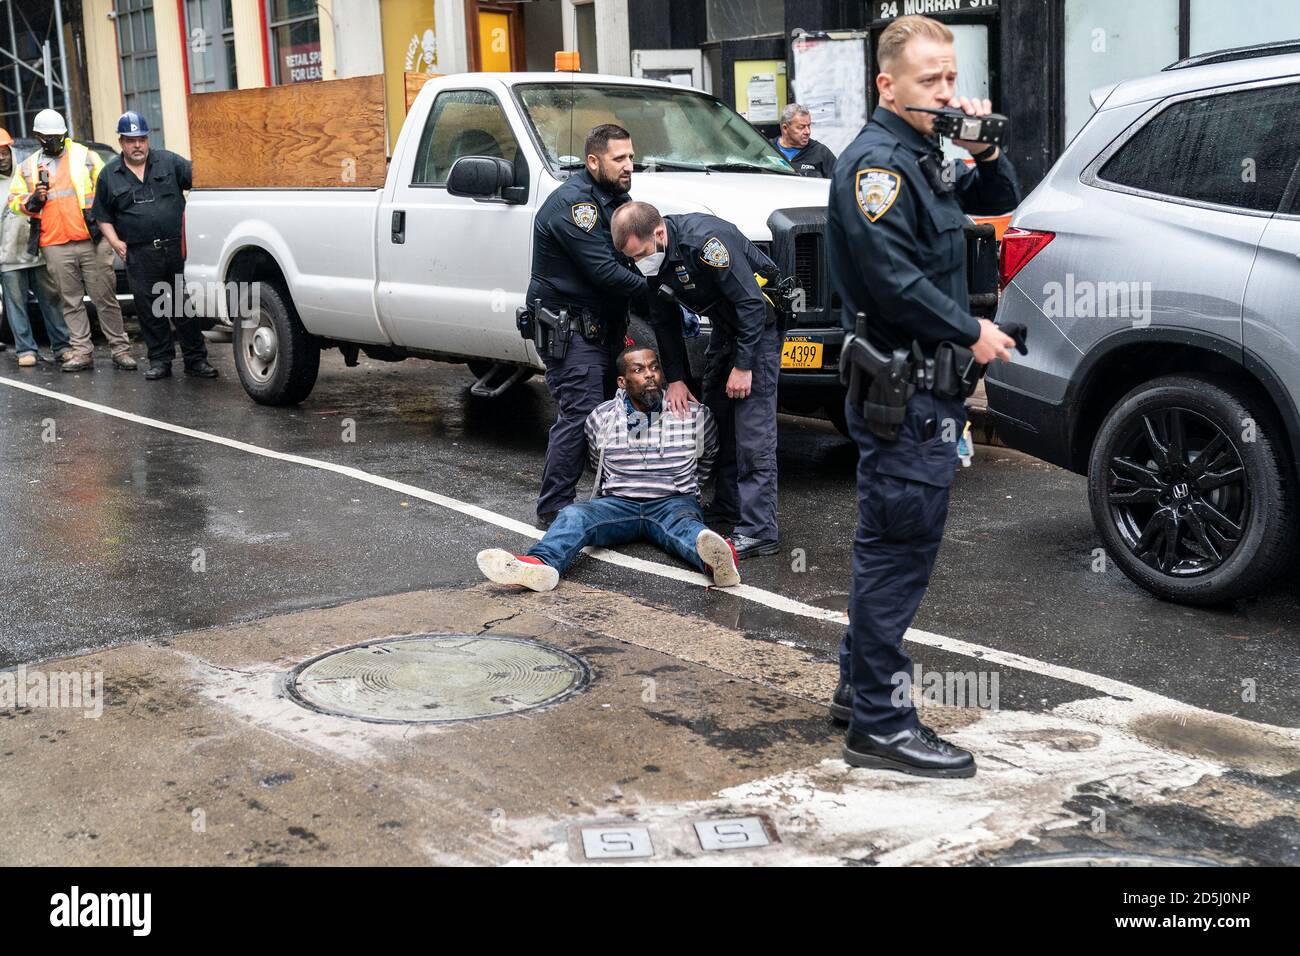 New York, United States. 13th Oct, 2020. Police arrested an emotionally distorbed homeless man and called EMS to get him help on Murray street in New York on October 13, 2020. Prior to his arrest, the man was fighting with other people and a bystander called 911. Police carefully placed the man under arrest and decided to call EMS for help. (Photo by Lev Radin/Sipa USA) Credit: Sipa USA/Alamy Live News Stock Photo